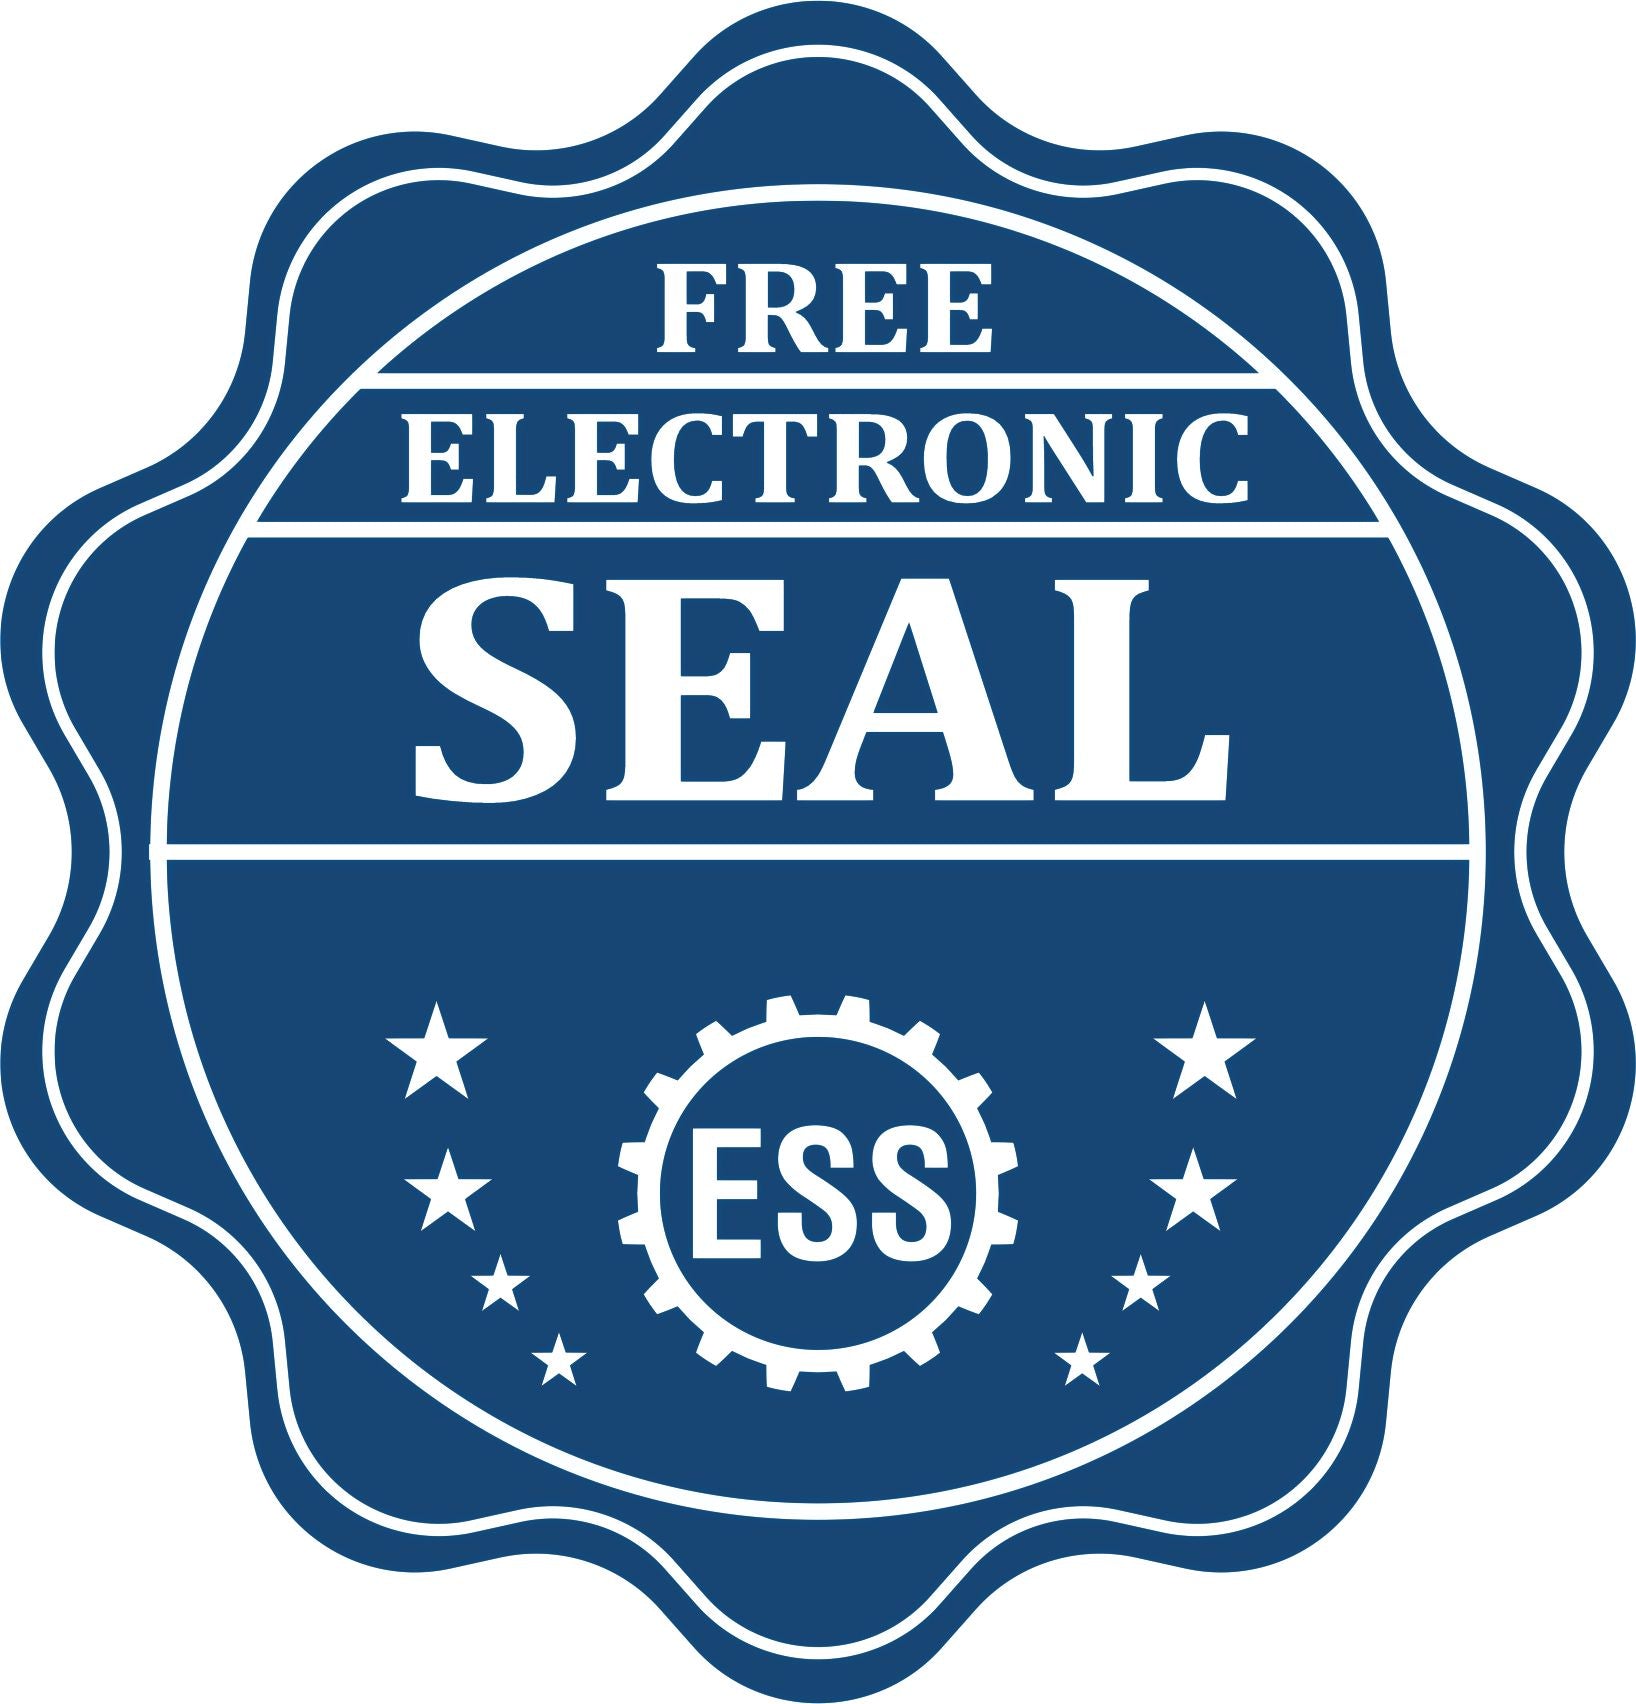 A badge showing a free electronic seal for the North Dakota Geologist Desk Seal with stars and the ESS gear on the emblem.